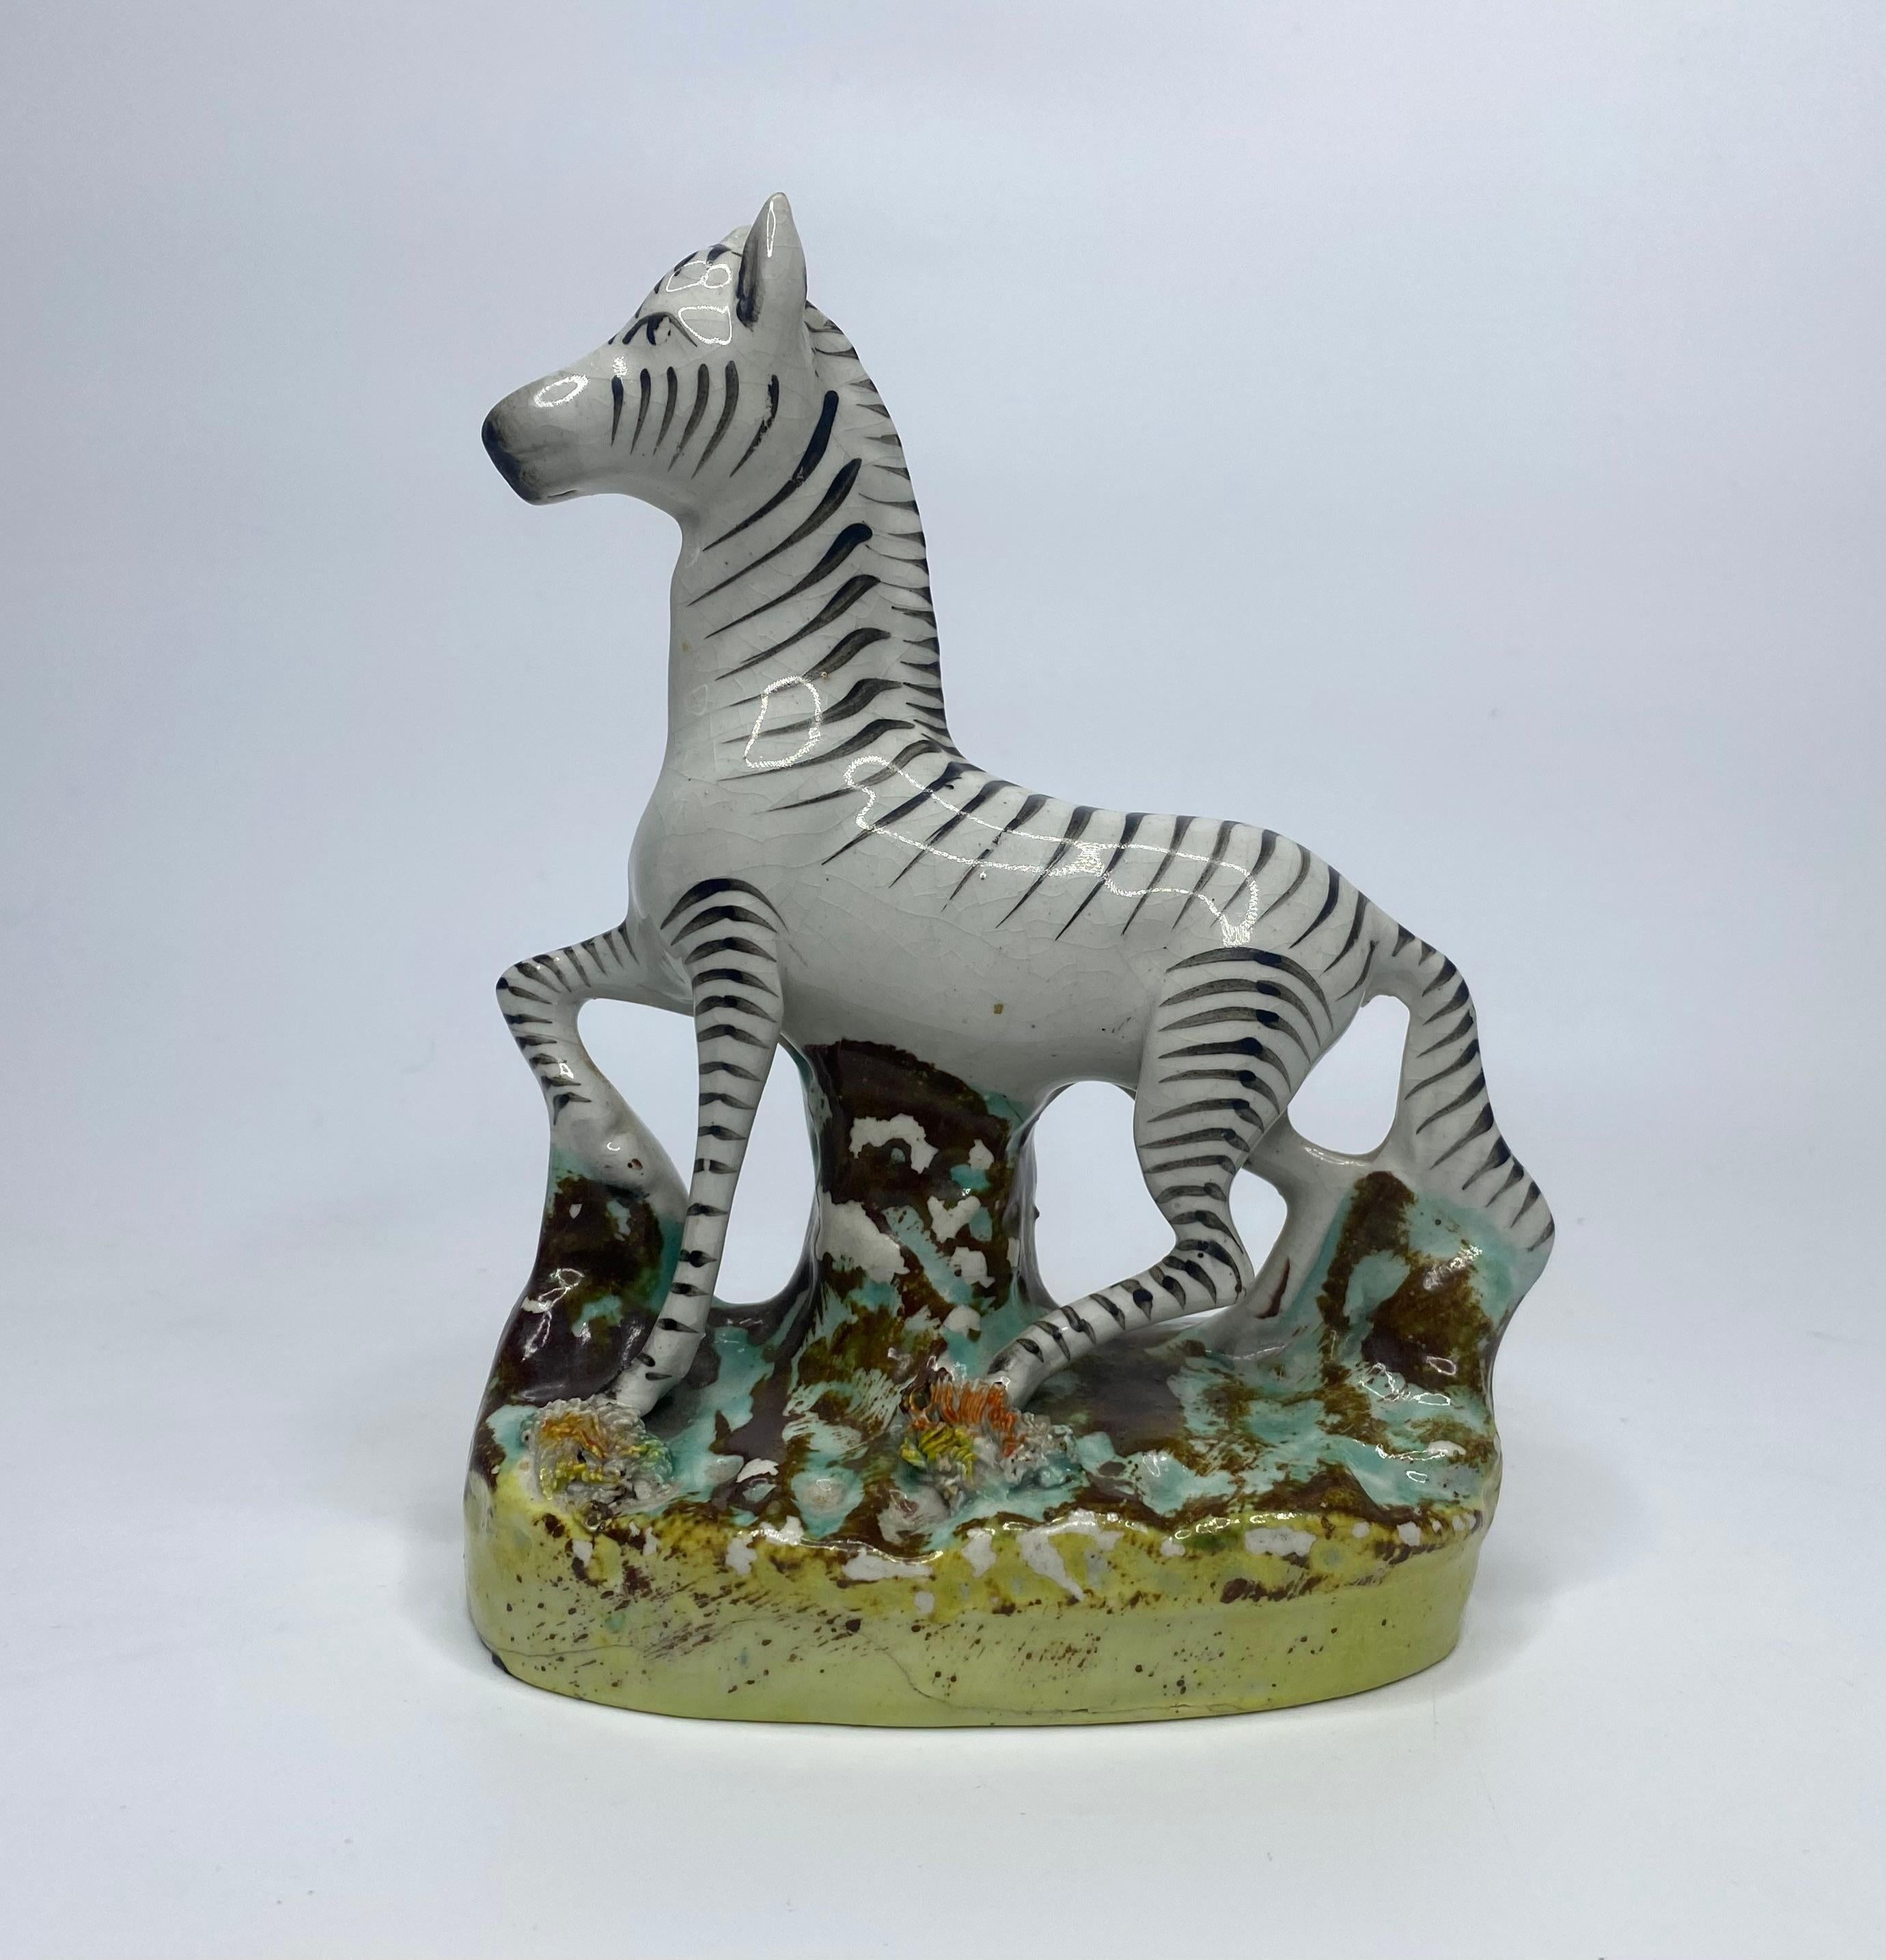 Pair of Staffordshire pottery zebra, Thomas Parr factory, c. 1860. Well modelled as the two zebra, standing upon oval mound grassy bases.
Height – 16 cm, 6 1/4”.
Length – 12 cm, 4 3/4”.
Depth – 6.5 cm, 2 1/2”.
Condition – Glaze crack to reverse of